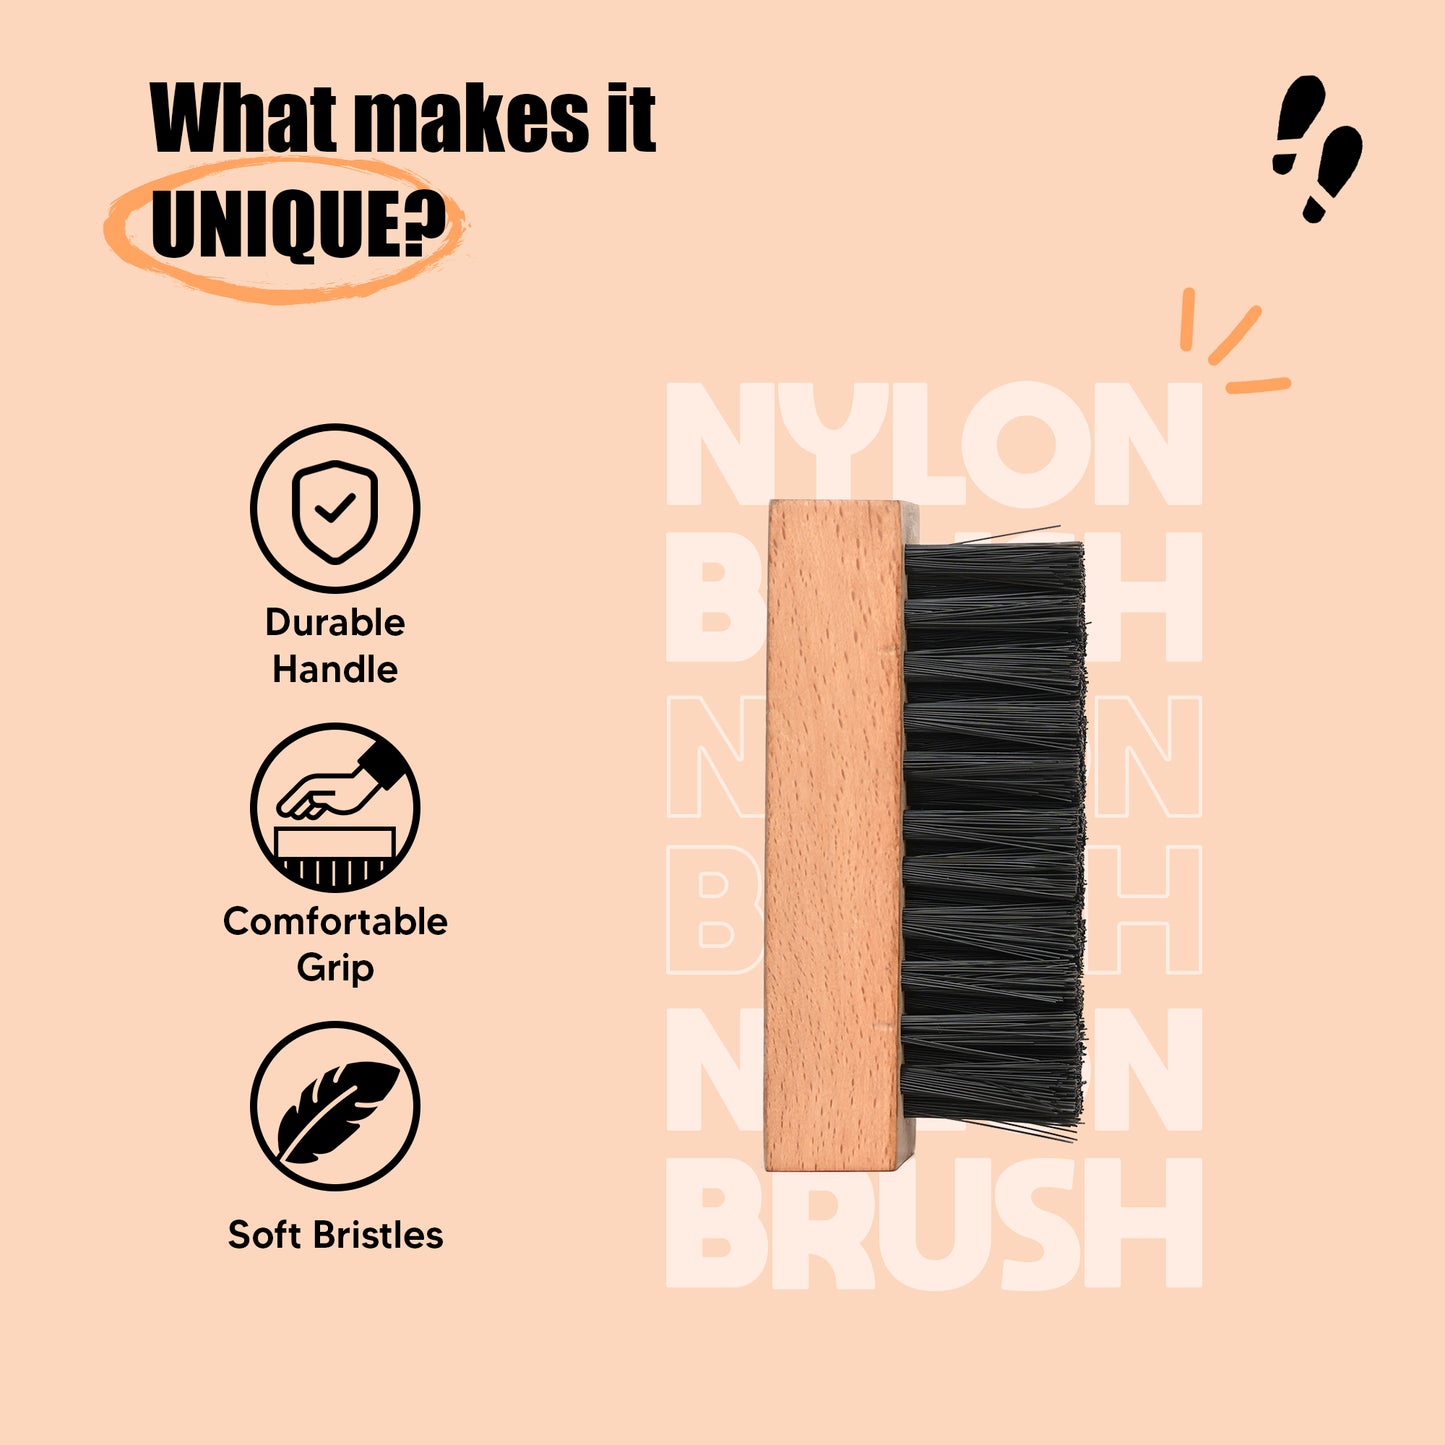 Shoe Mistri Hand Made Nylon Bristles Shoe Brush for Cleaning, Foaming & Scrubbing Shoe Cleaner on Sneakers and Other Footwear